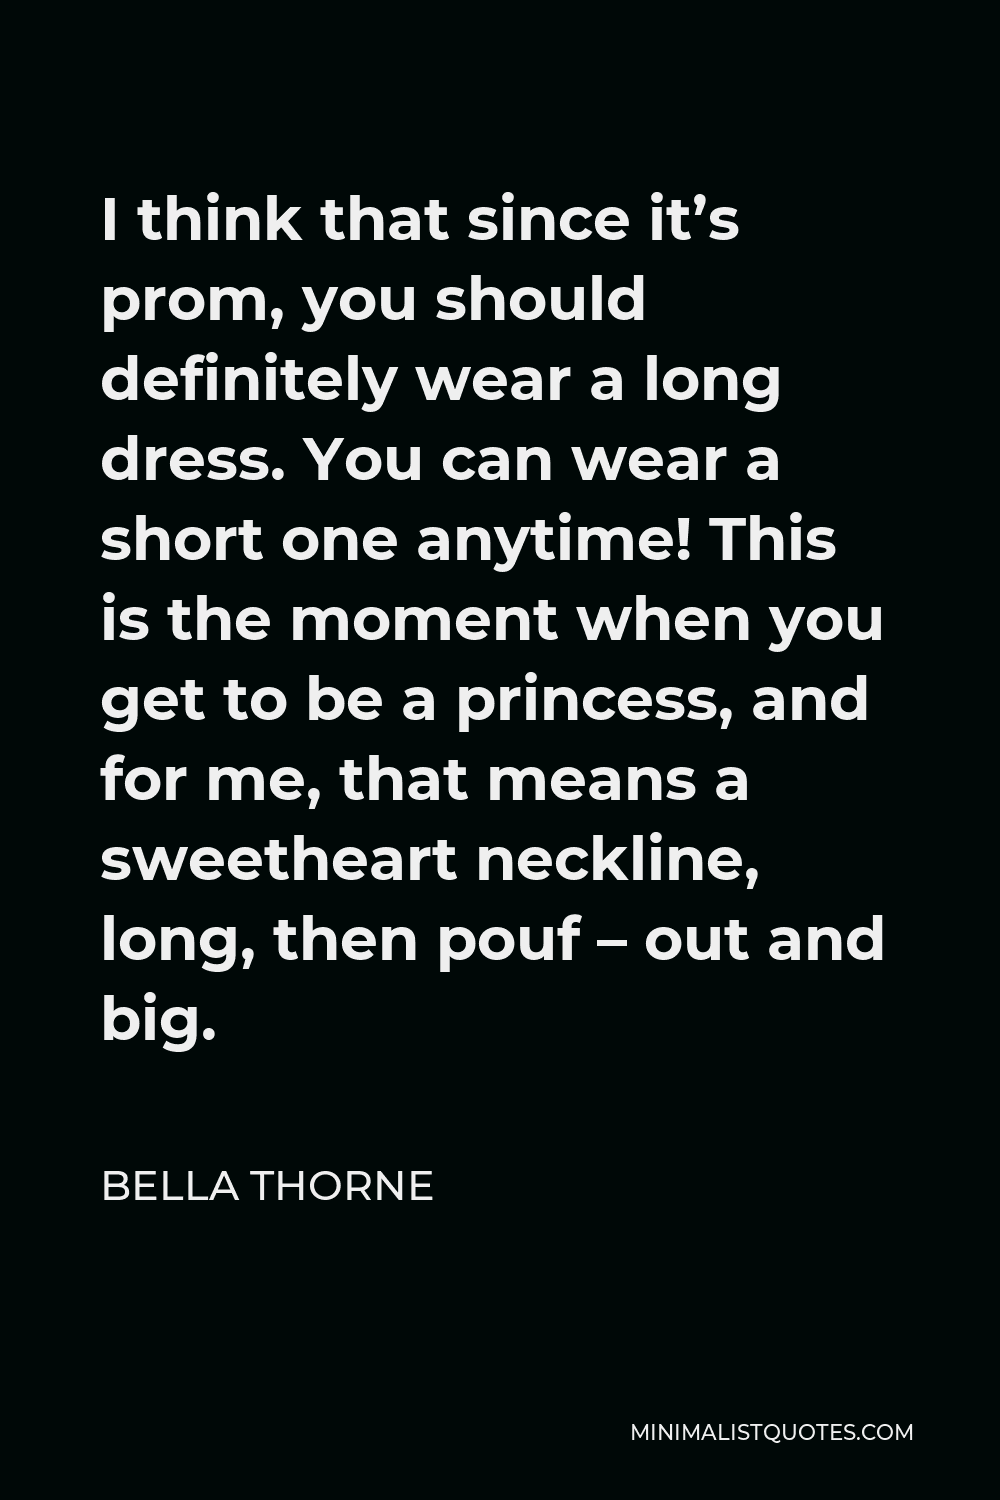 Bella Thorne Quote - I think that since it’s prom, you should definitely wear a long dress. You can wear a short one anytime! This is the moment when you get to be a princess, and for me, that means a sweetheart neckline, long, then pouf – out and big.